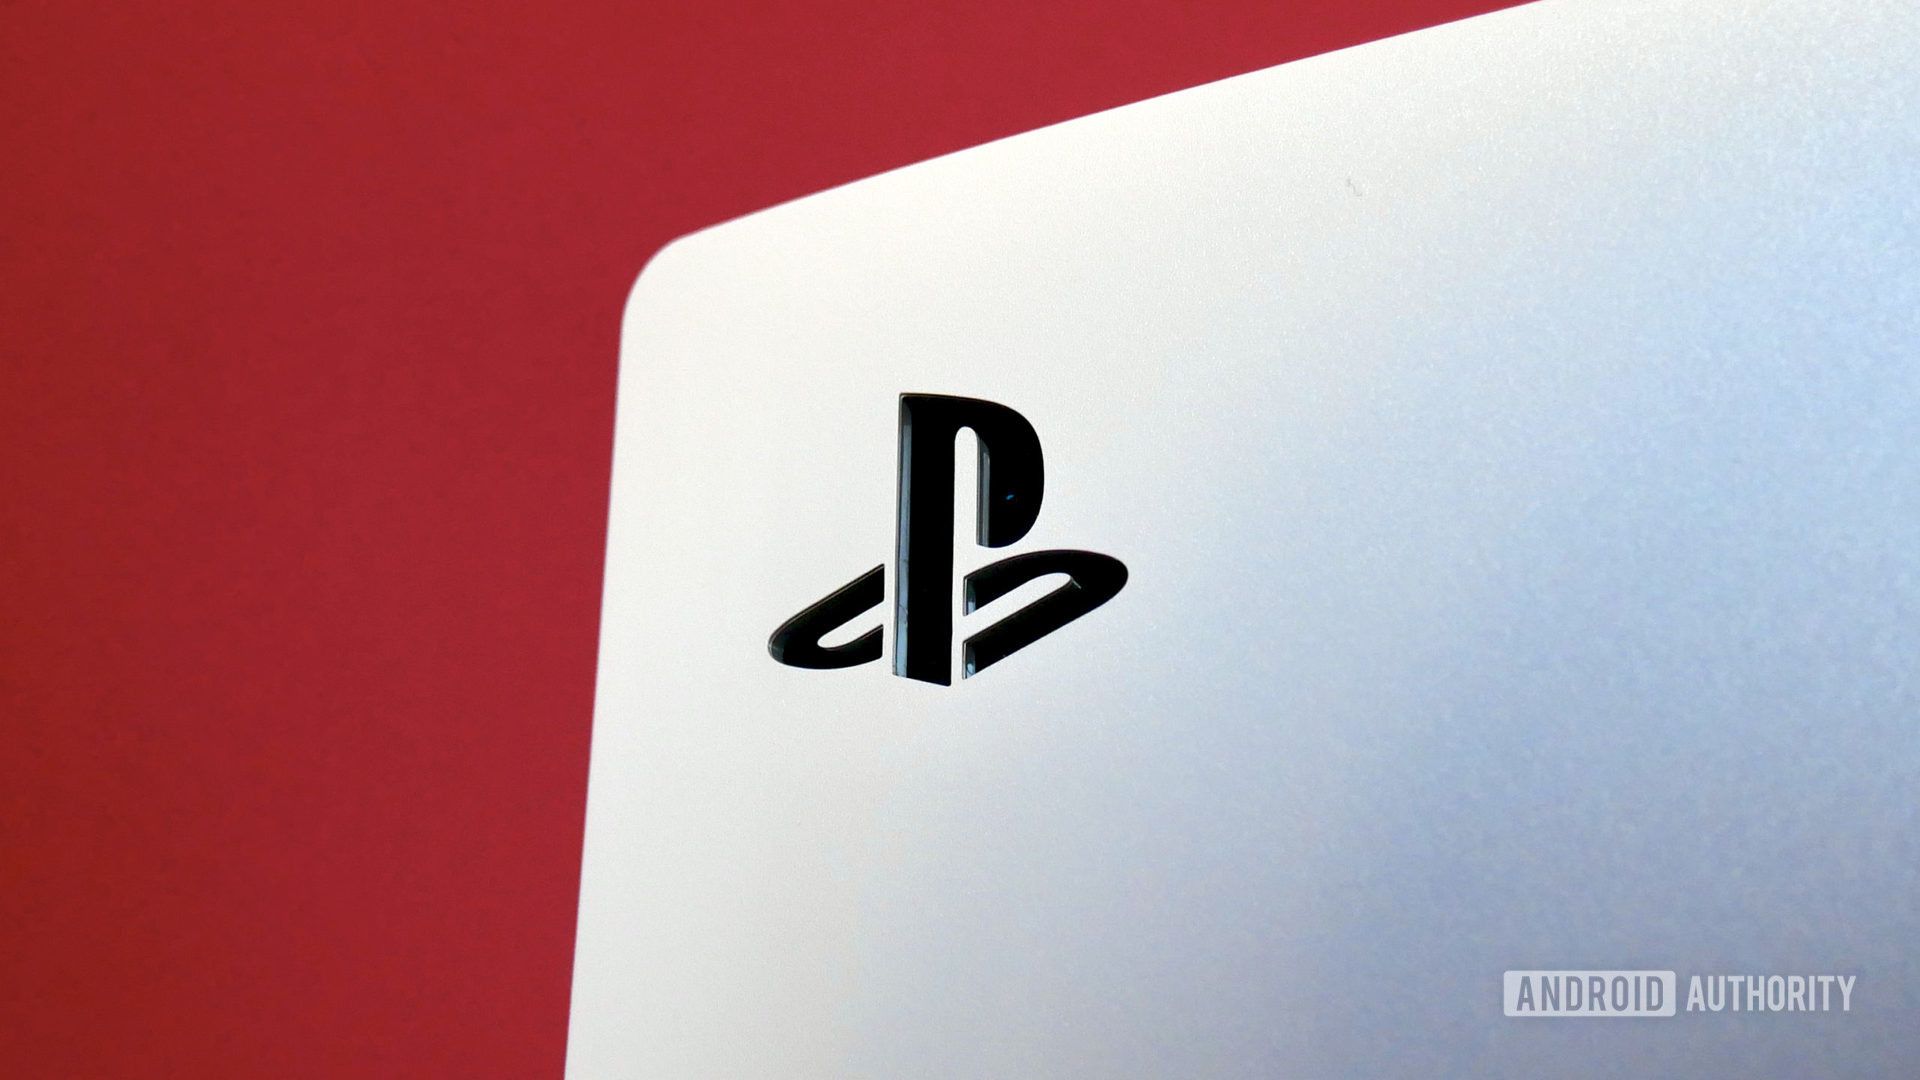 PS5 buyer's guide: All you need to know about Sony's PlayStation 5